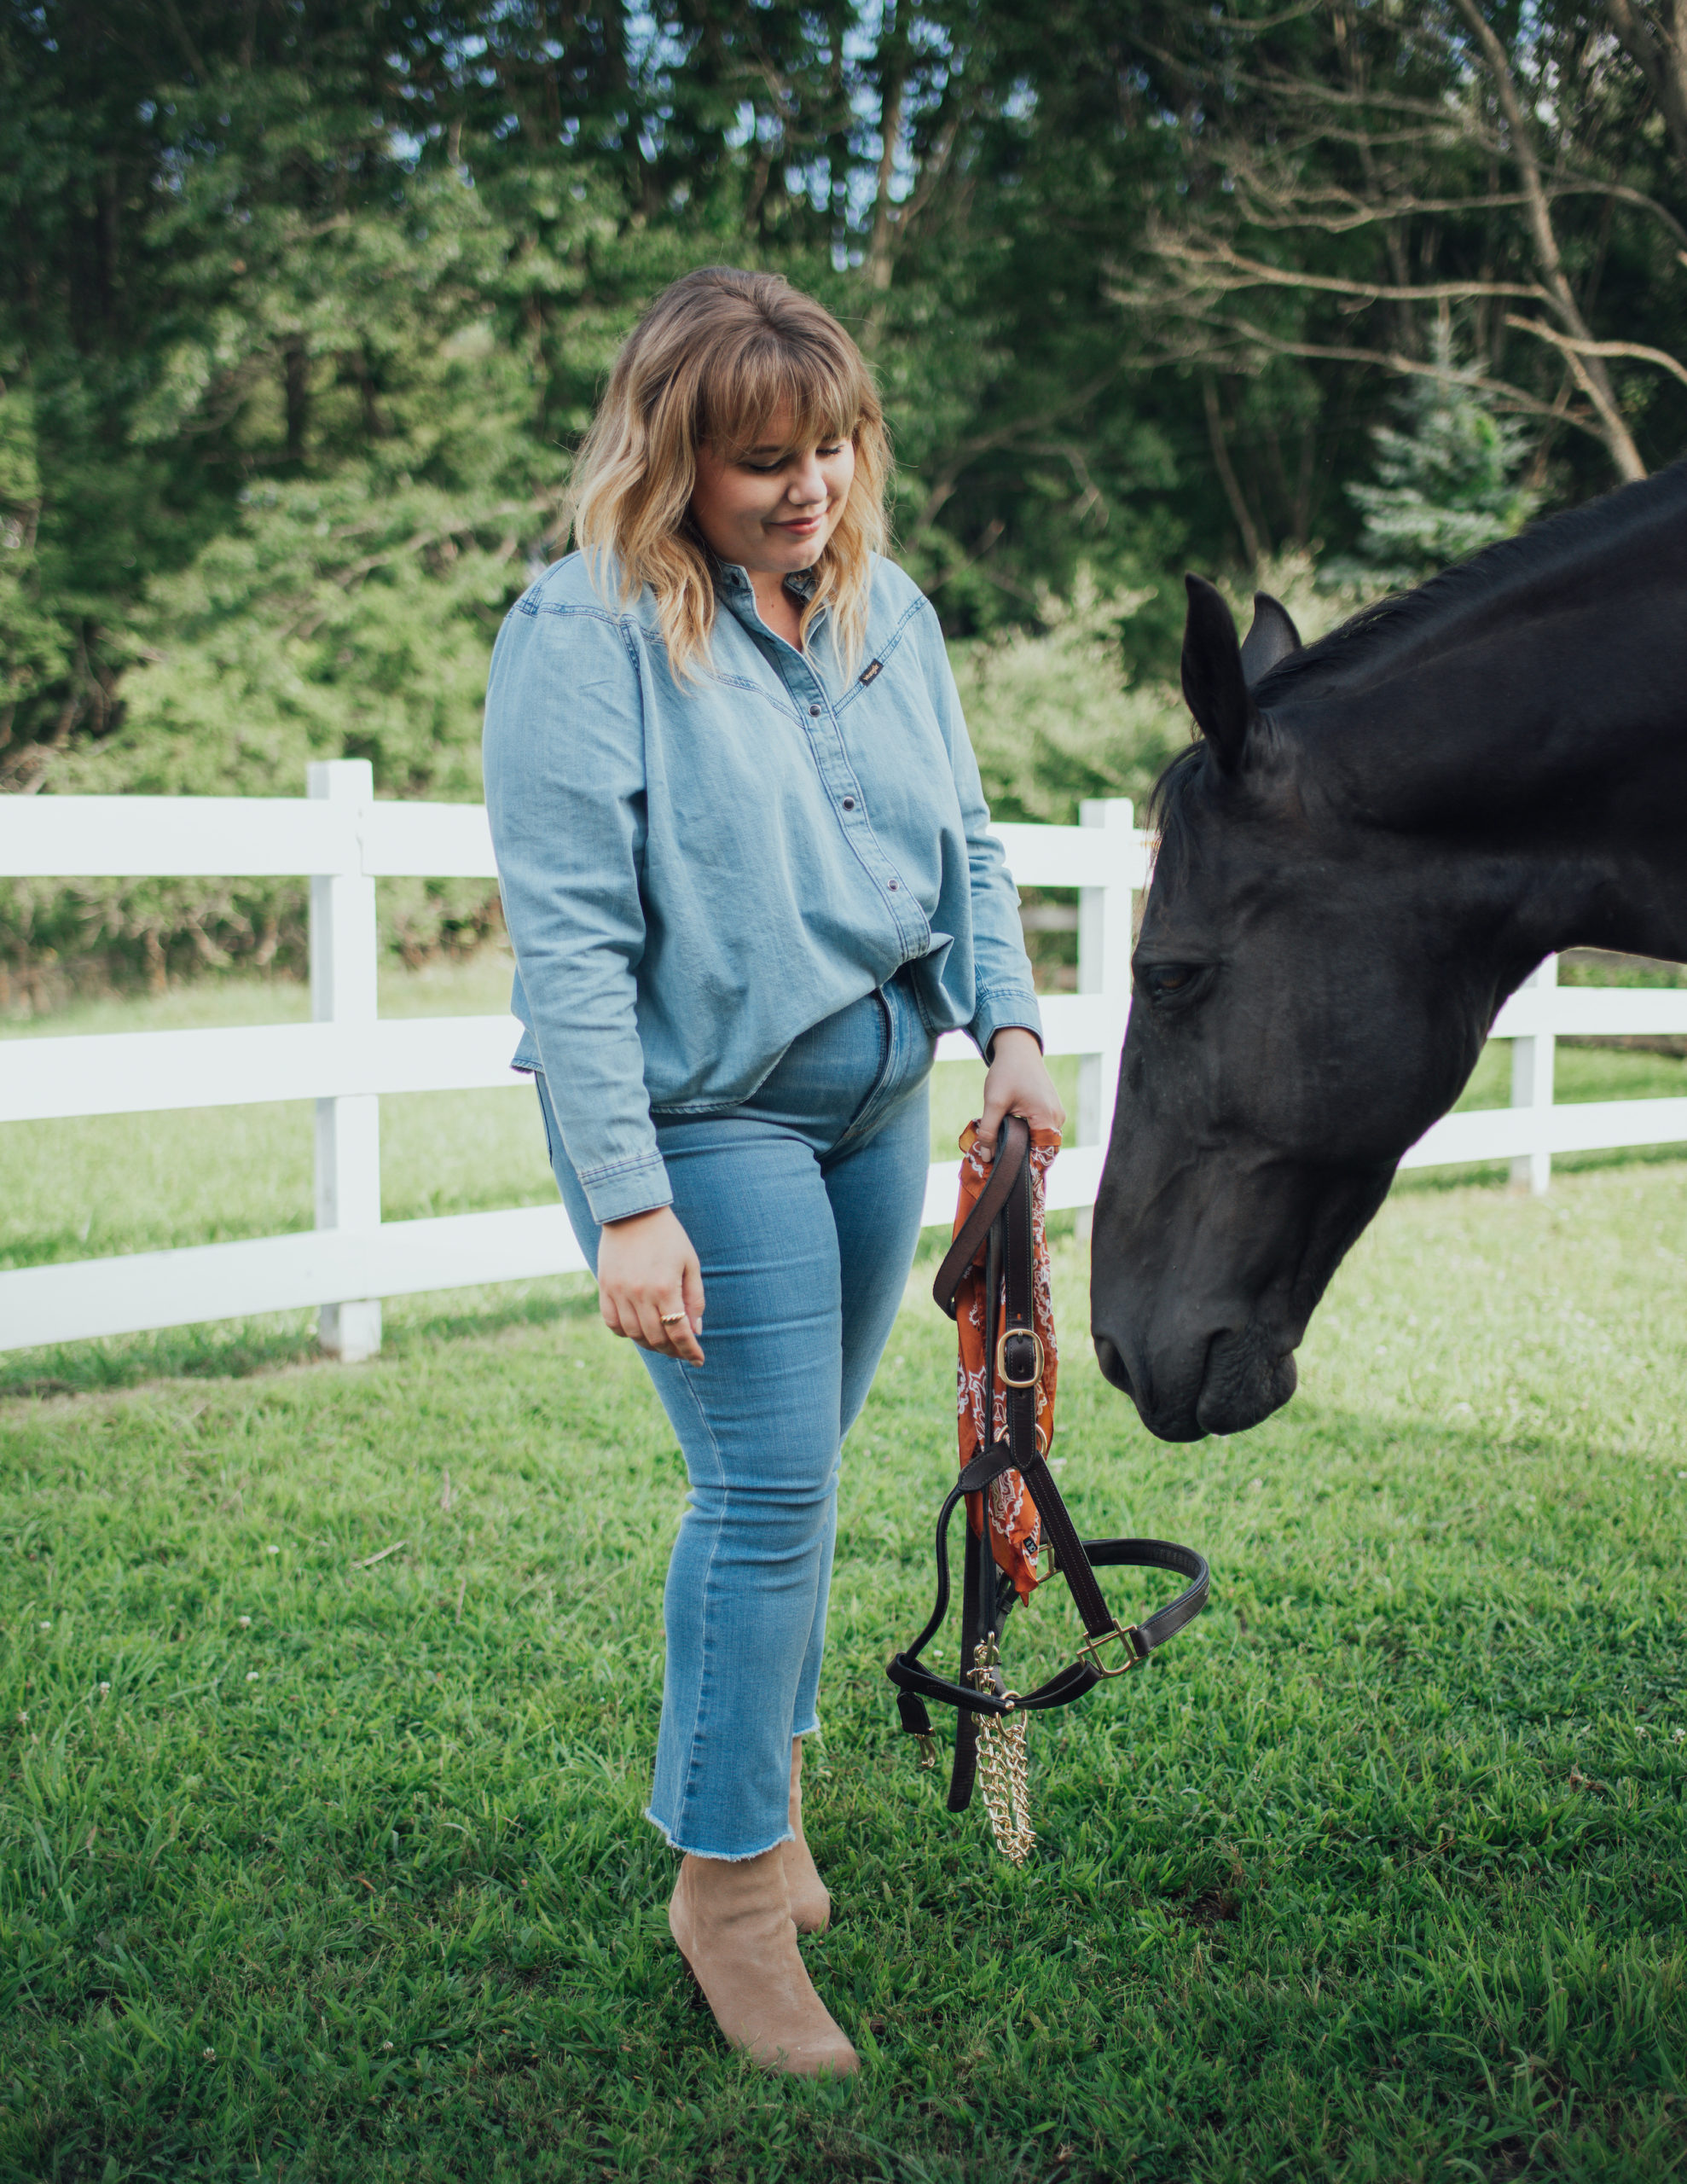 Plus size denim by Wrangler part of the new lady Wrangler collection! Sharing some special photos of my horses and some FAB jeans! 